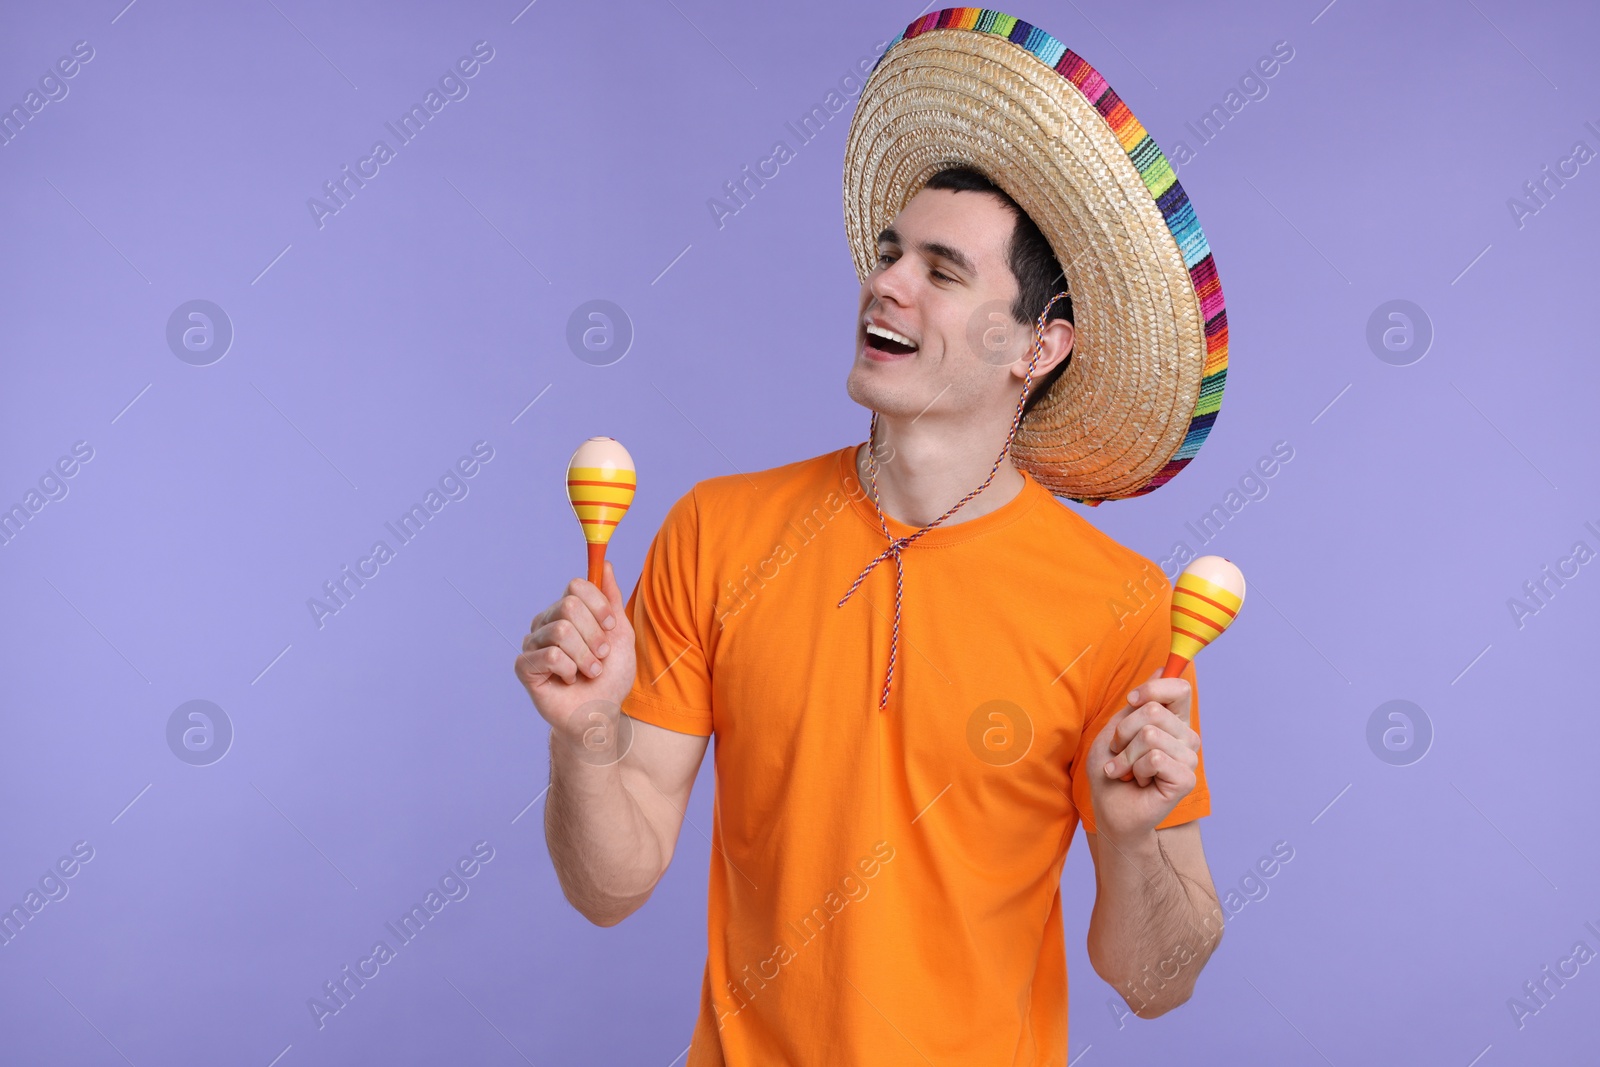 Photo of Young man in Mexican sombrero hat with maracas on violet background